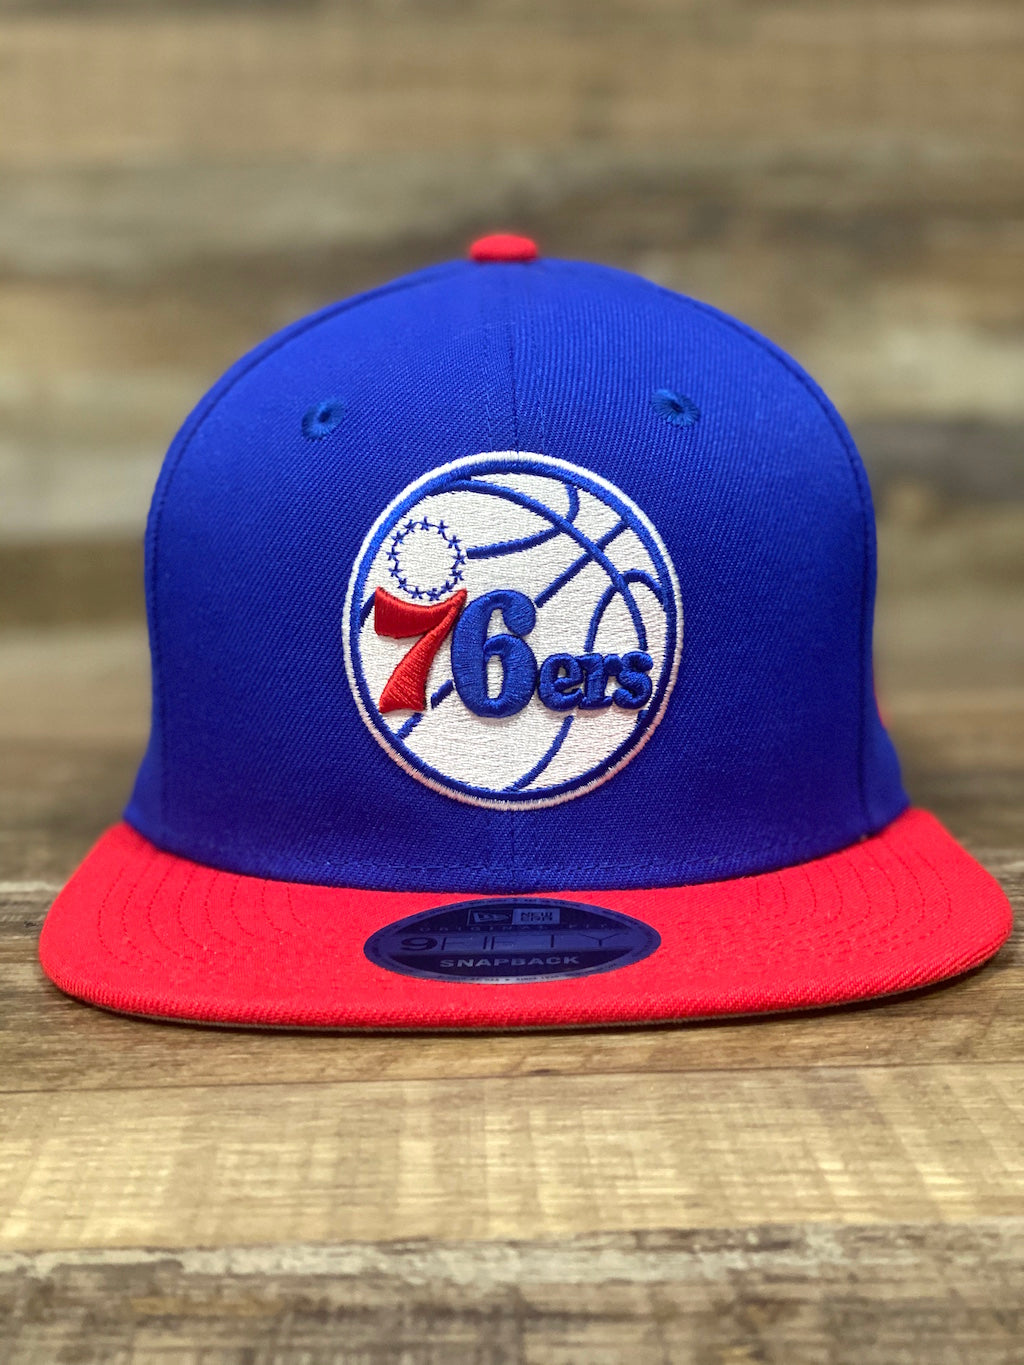 sixers snapback hat | 76ers colorway 950 snapback | Blue and red 76er snapback